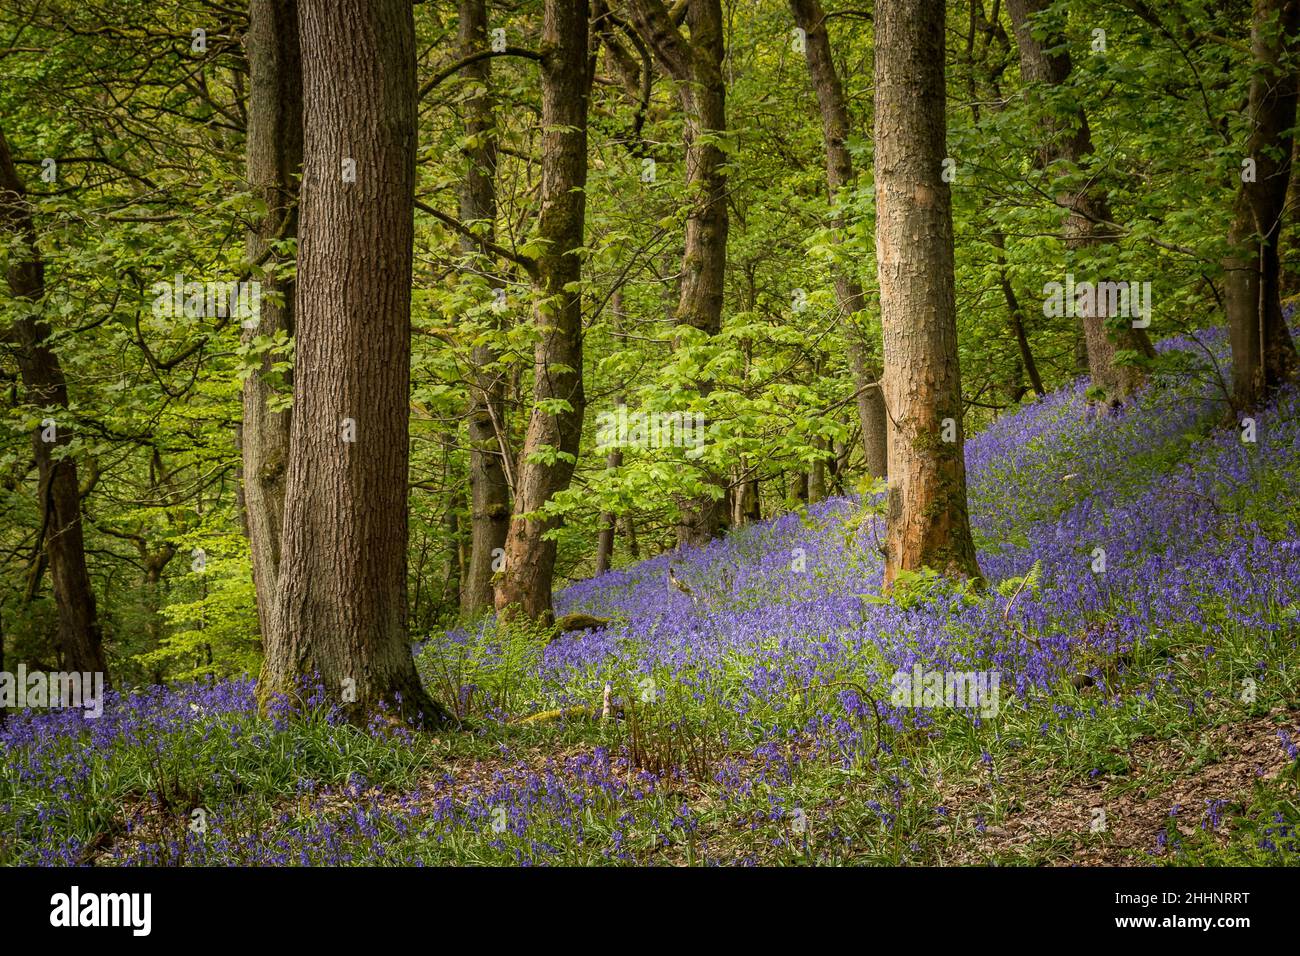 Bluebells (Hyacinthoides non-scripta)  Hardcastle Crags is a wooded Pennine valley in West Yorkshire, England. Stock Photo